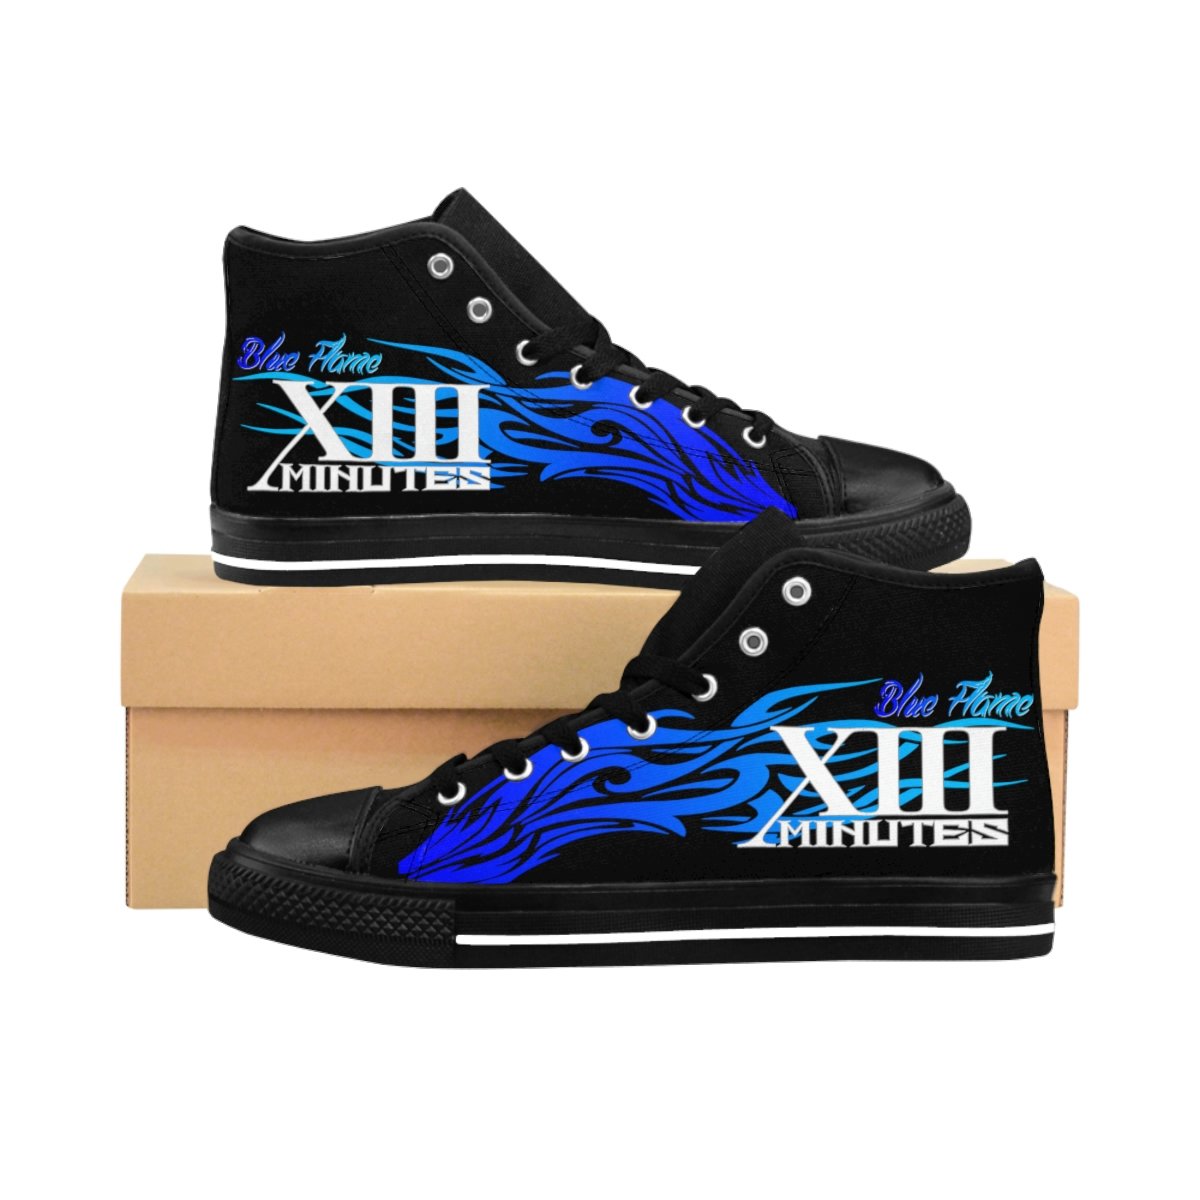 XIII Minutes Blue Flame Women’s High-top Sneakers